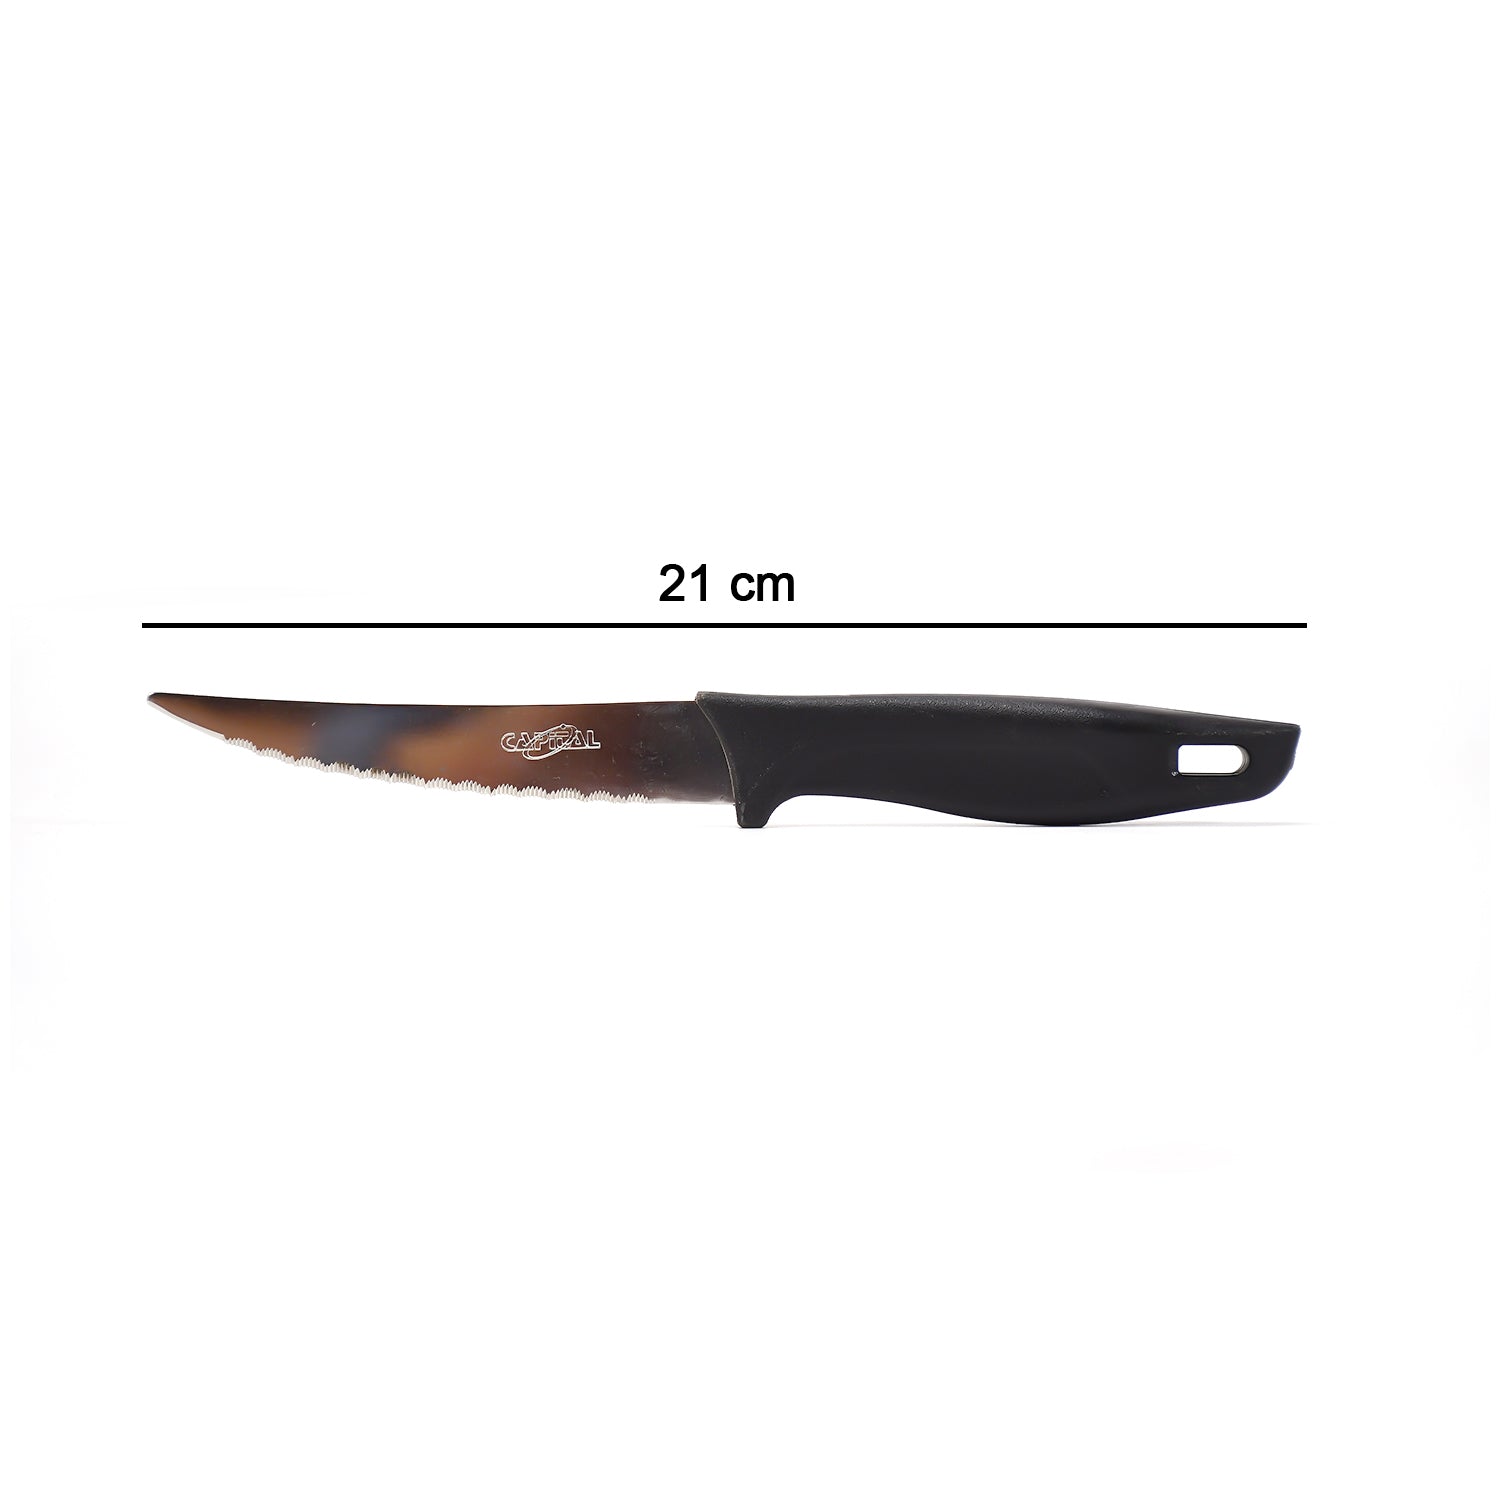 2397 Stainless Steel knife and Kitchen Knife with Black Grip Handle (21 cm) DeoDap